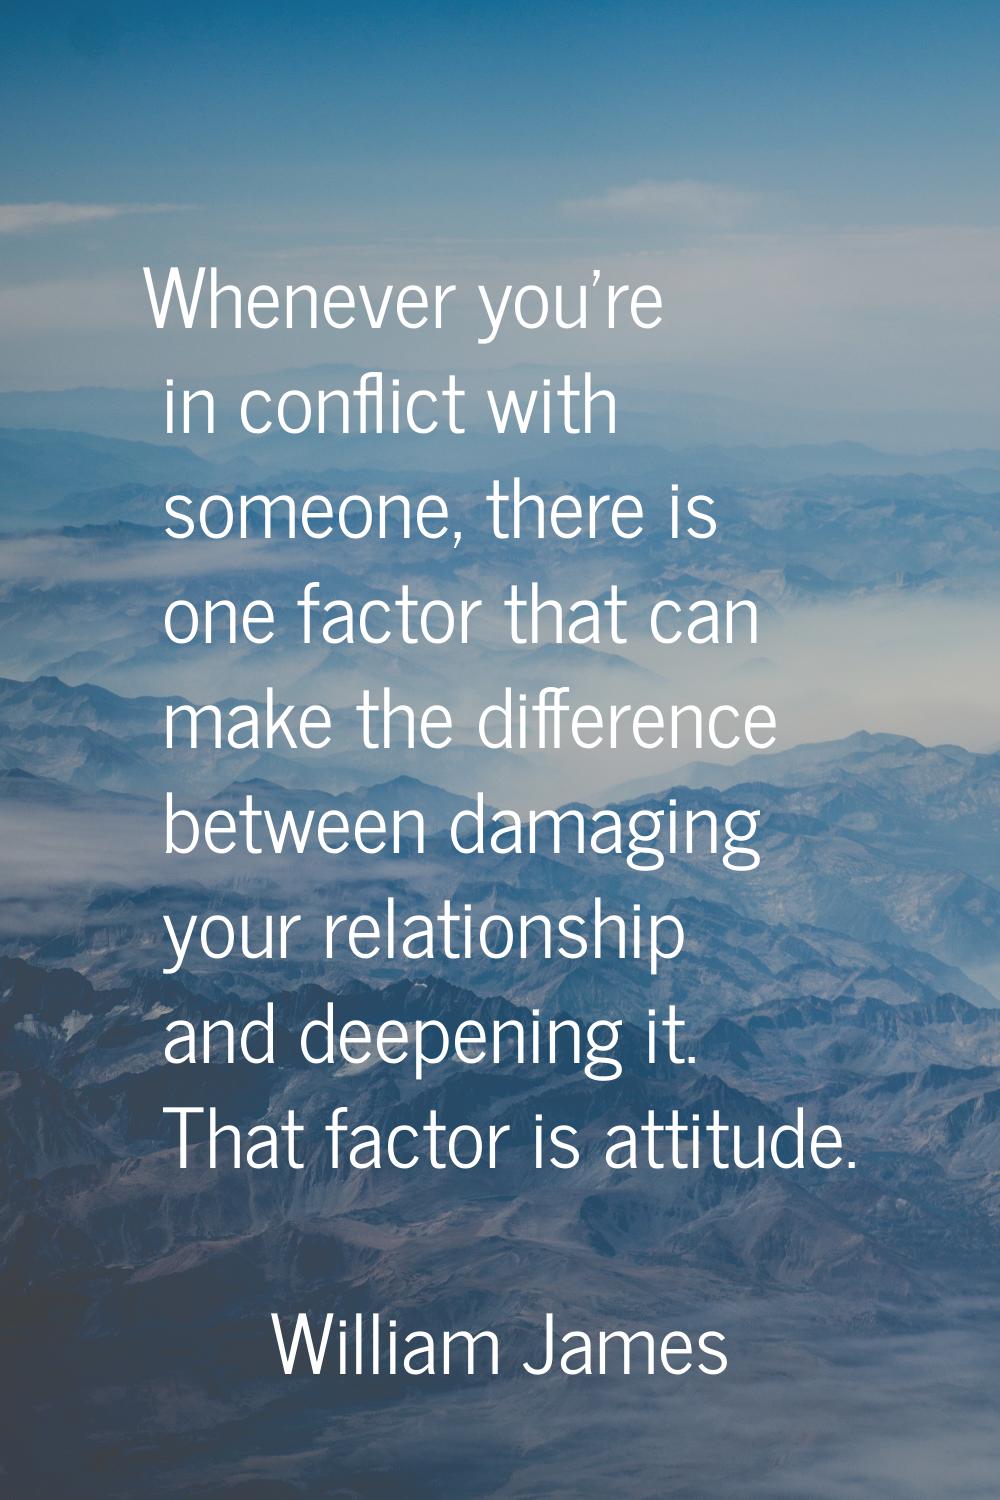 Whenever you're in conflict with someone, there is one factor that can make the difference between 